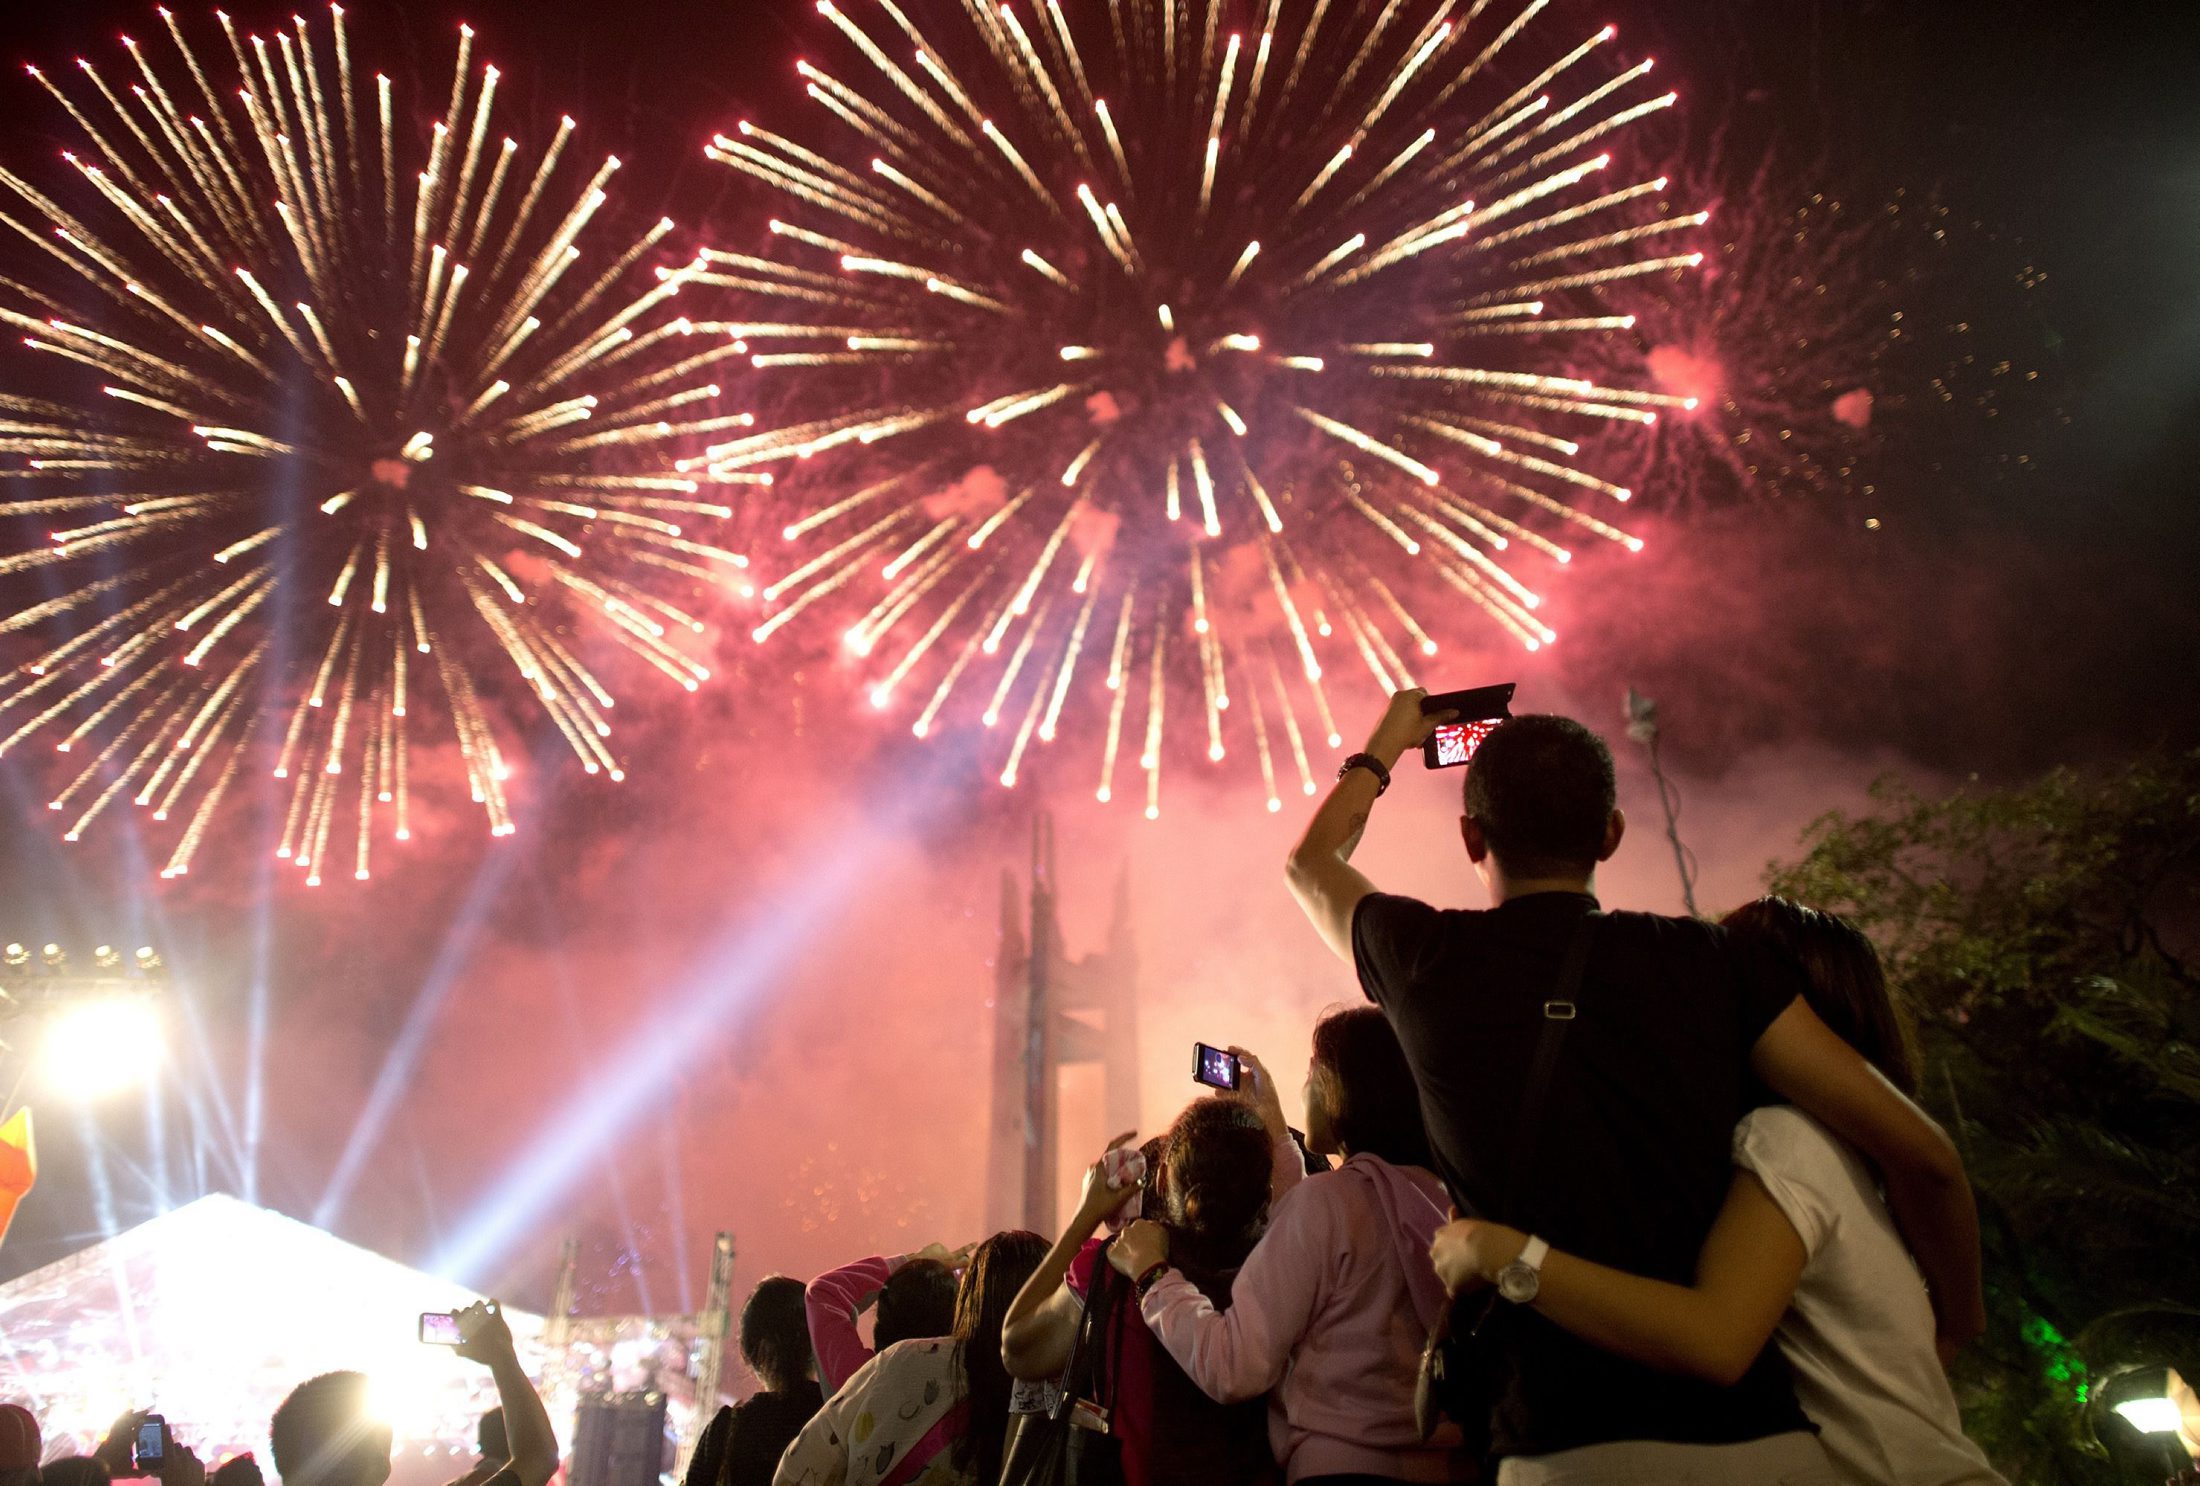 People look at fireworks during a New Year Celebration in Manila on January 1, 2015. The Philippines is mainly Roman Catholic but the celebrations draw on ancient superstitions and Chinese traditions in which the noise from firecrackers is meant to drive away evil spirits and bring good luck in the coming year. Philippine authorities said more than 260 people had been injured by fireworks, firecrackers or stray bullets in the days leading up to New Year's Eve.    AFP PHOTO / NOEL CELIS